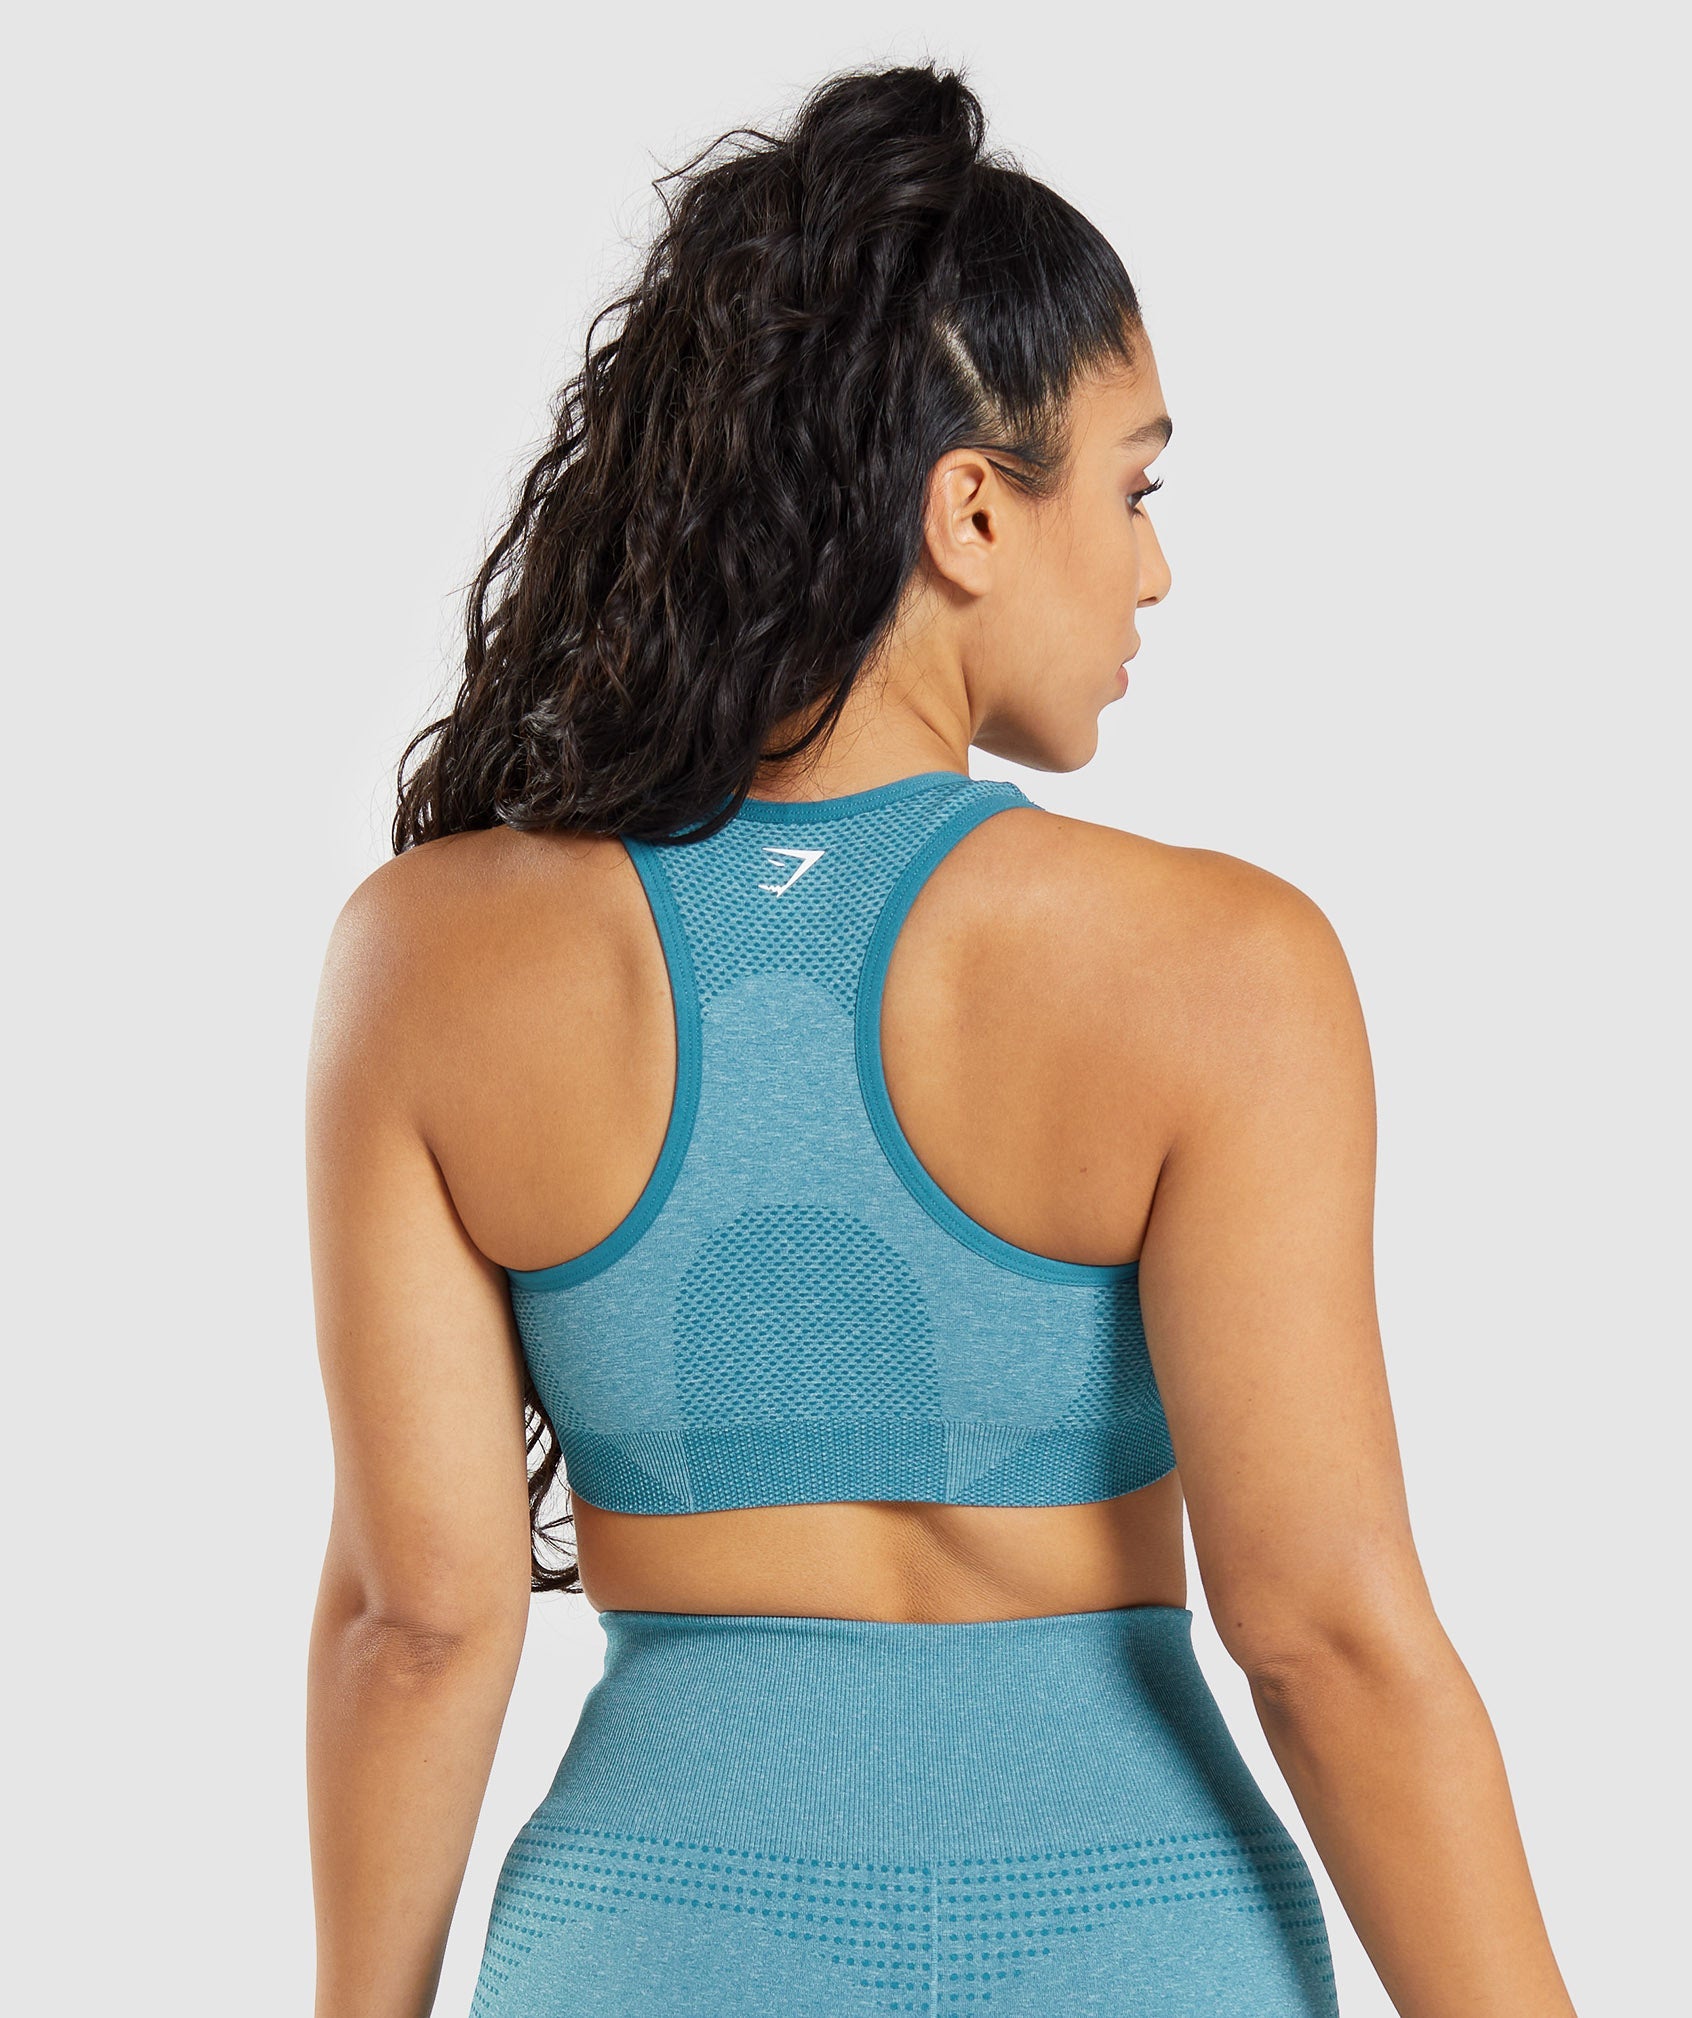 Gymshark True Texture Sports Bra XS - $19 - From Nathaly